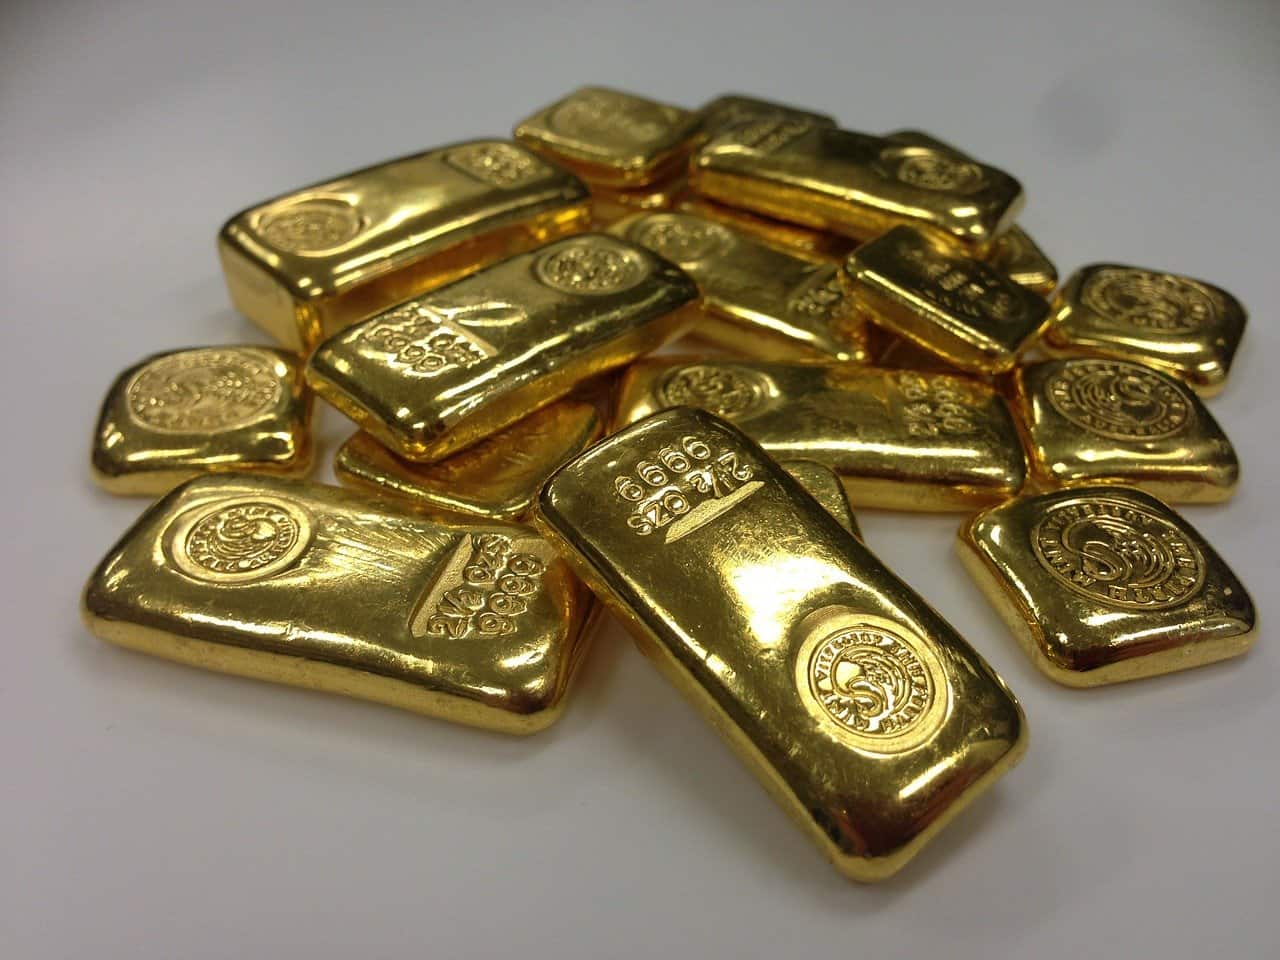 Golden Strategy: Diversifying Your Assets and Maintaining Portfolio Purchasing Power with Gold